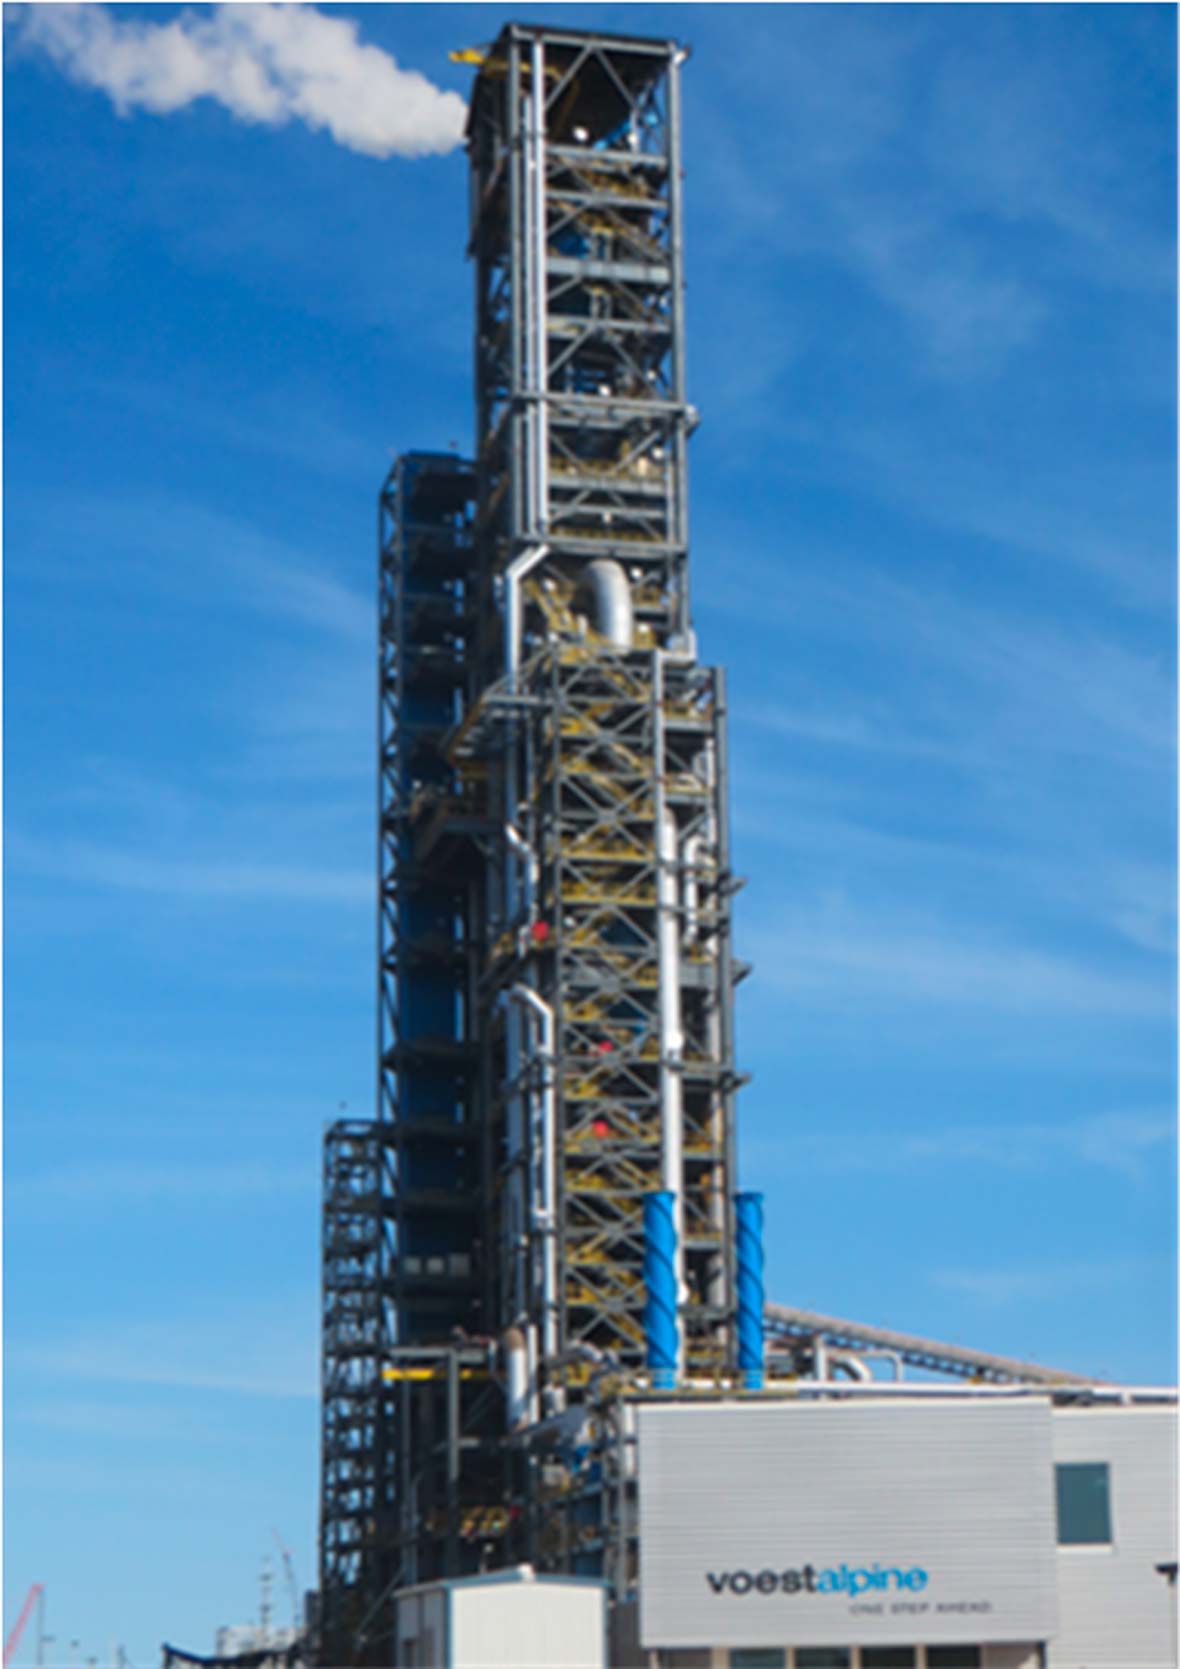 The voestalpine Texas MIDREX<sup>®</sup> DR Plant went into operation in 2017.